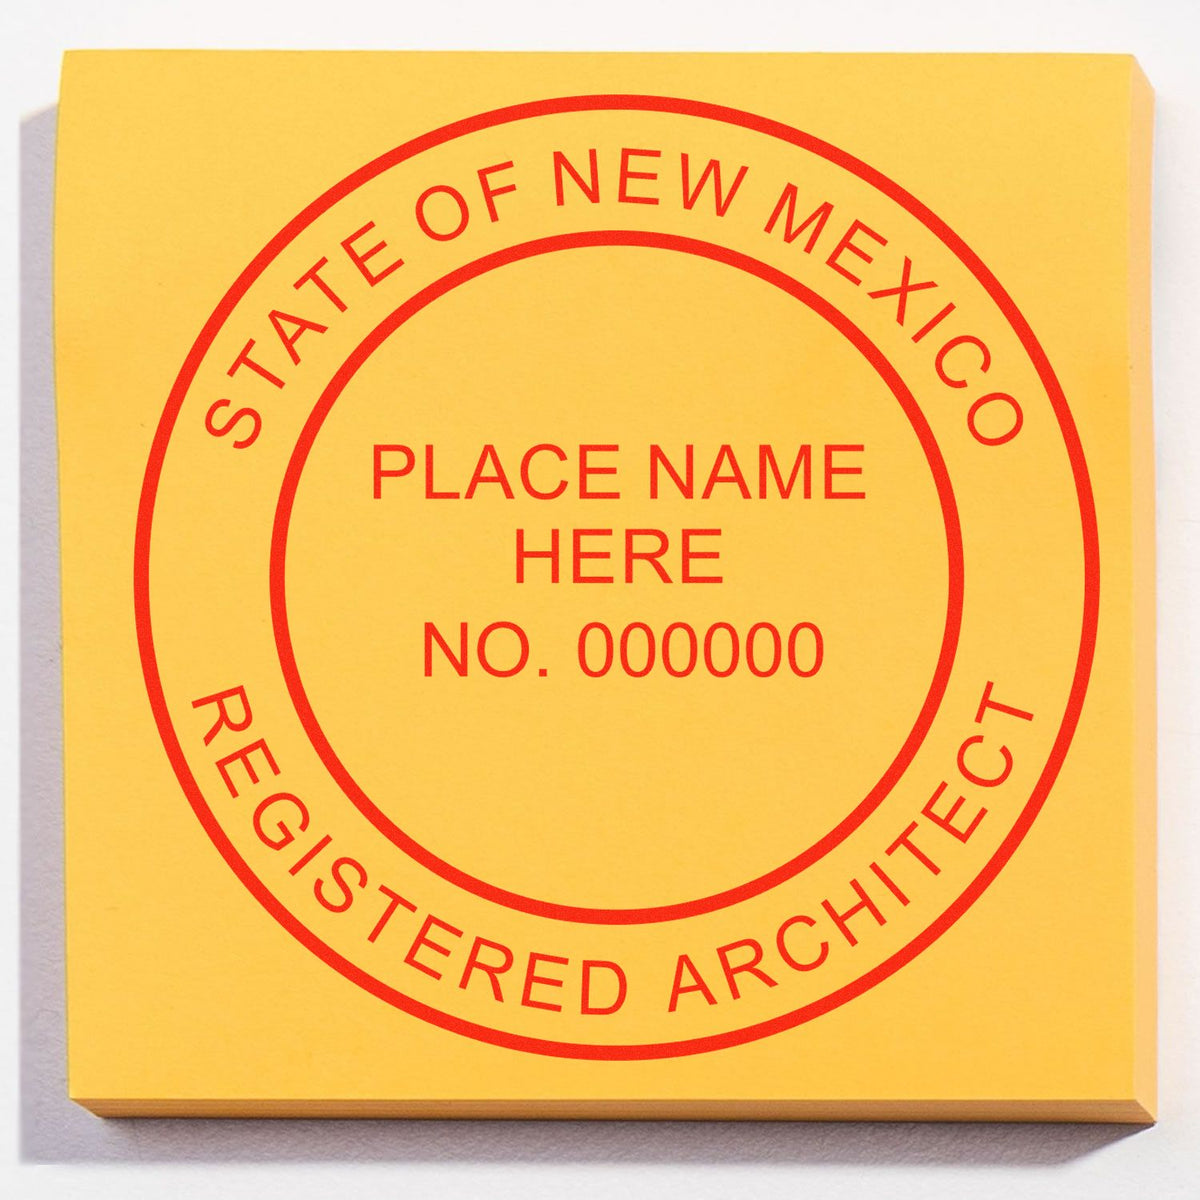 Slim Pre-Inked New Mexico Architect Seal Stamp in use photo showing a stamped imprint of the Slim Pre-Inked New Mexico Architect Seal Stamp